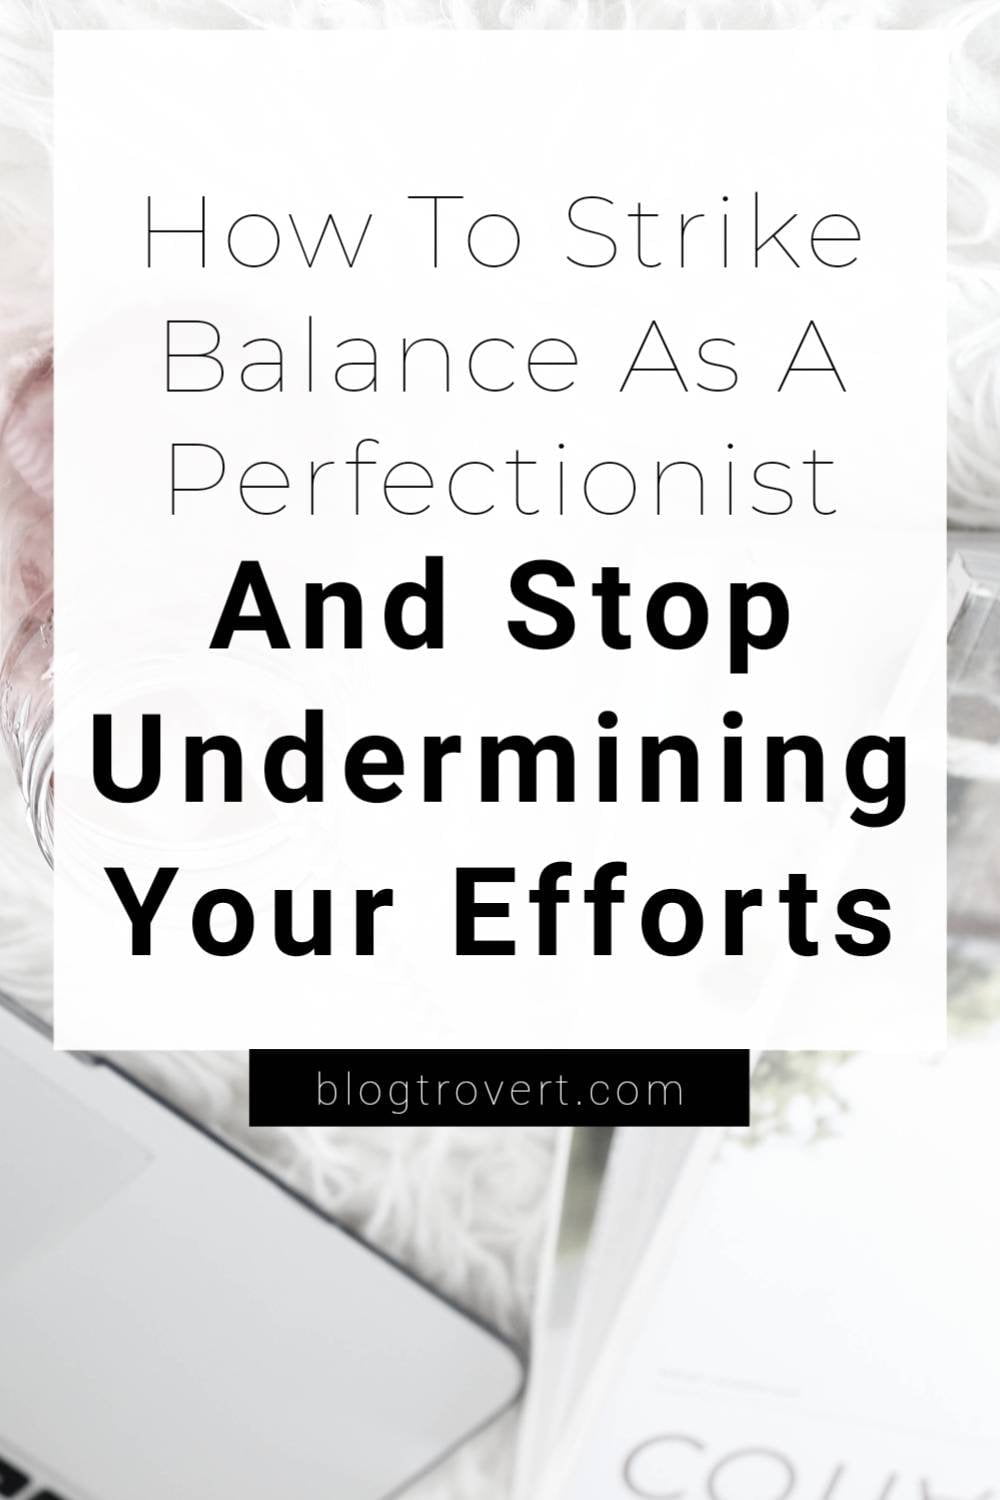 Perfectionism: How To Strike Balance As A Perfectionist 3